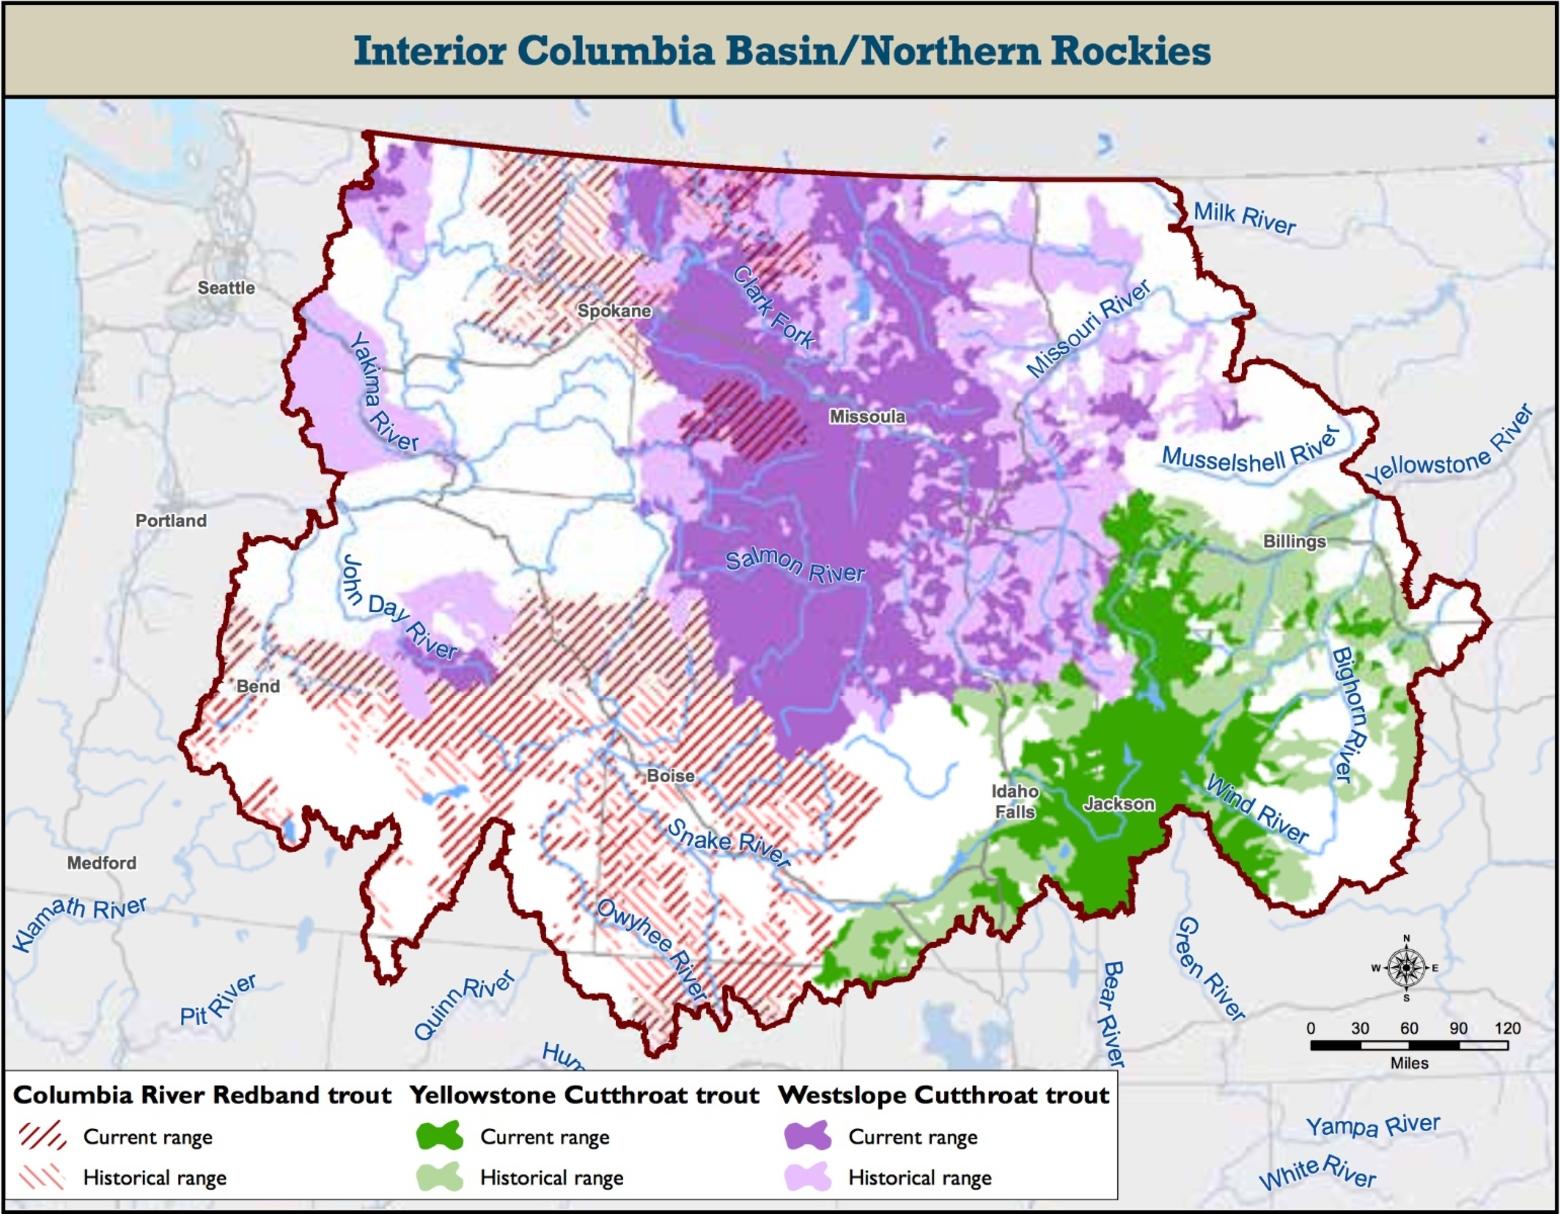 A Trout Unlimited map showing historic and current range of native trout in the Northern Rockies and beyond.